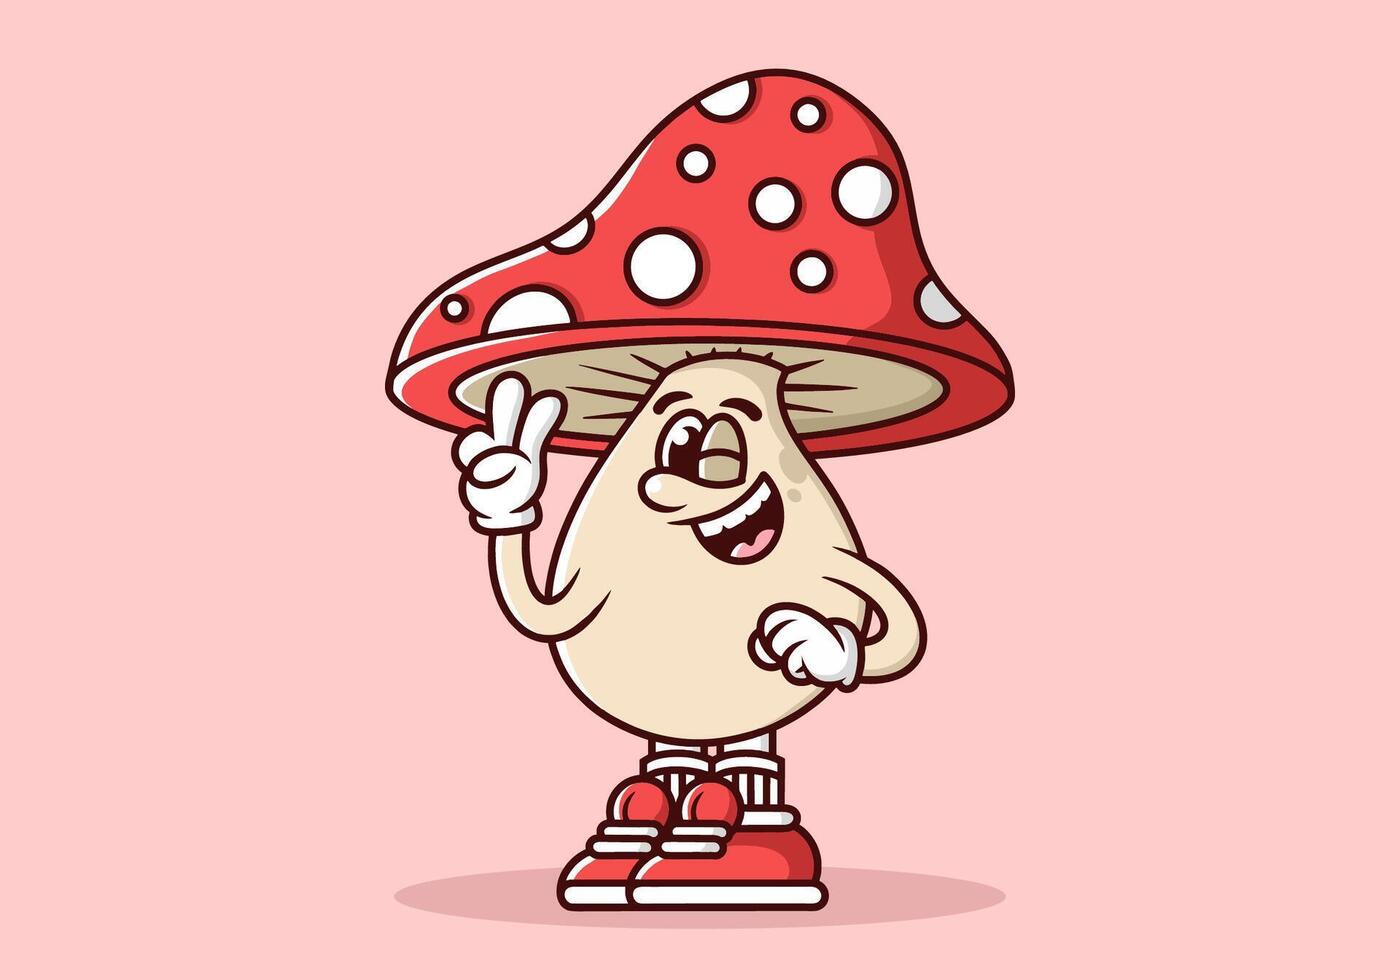 Mascot character of mushroom with hand form a symbol of peace. Red color vector